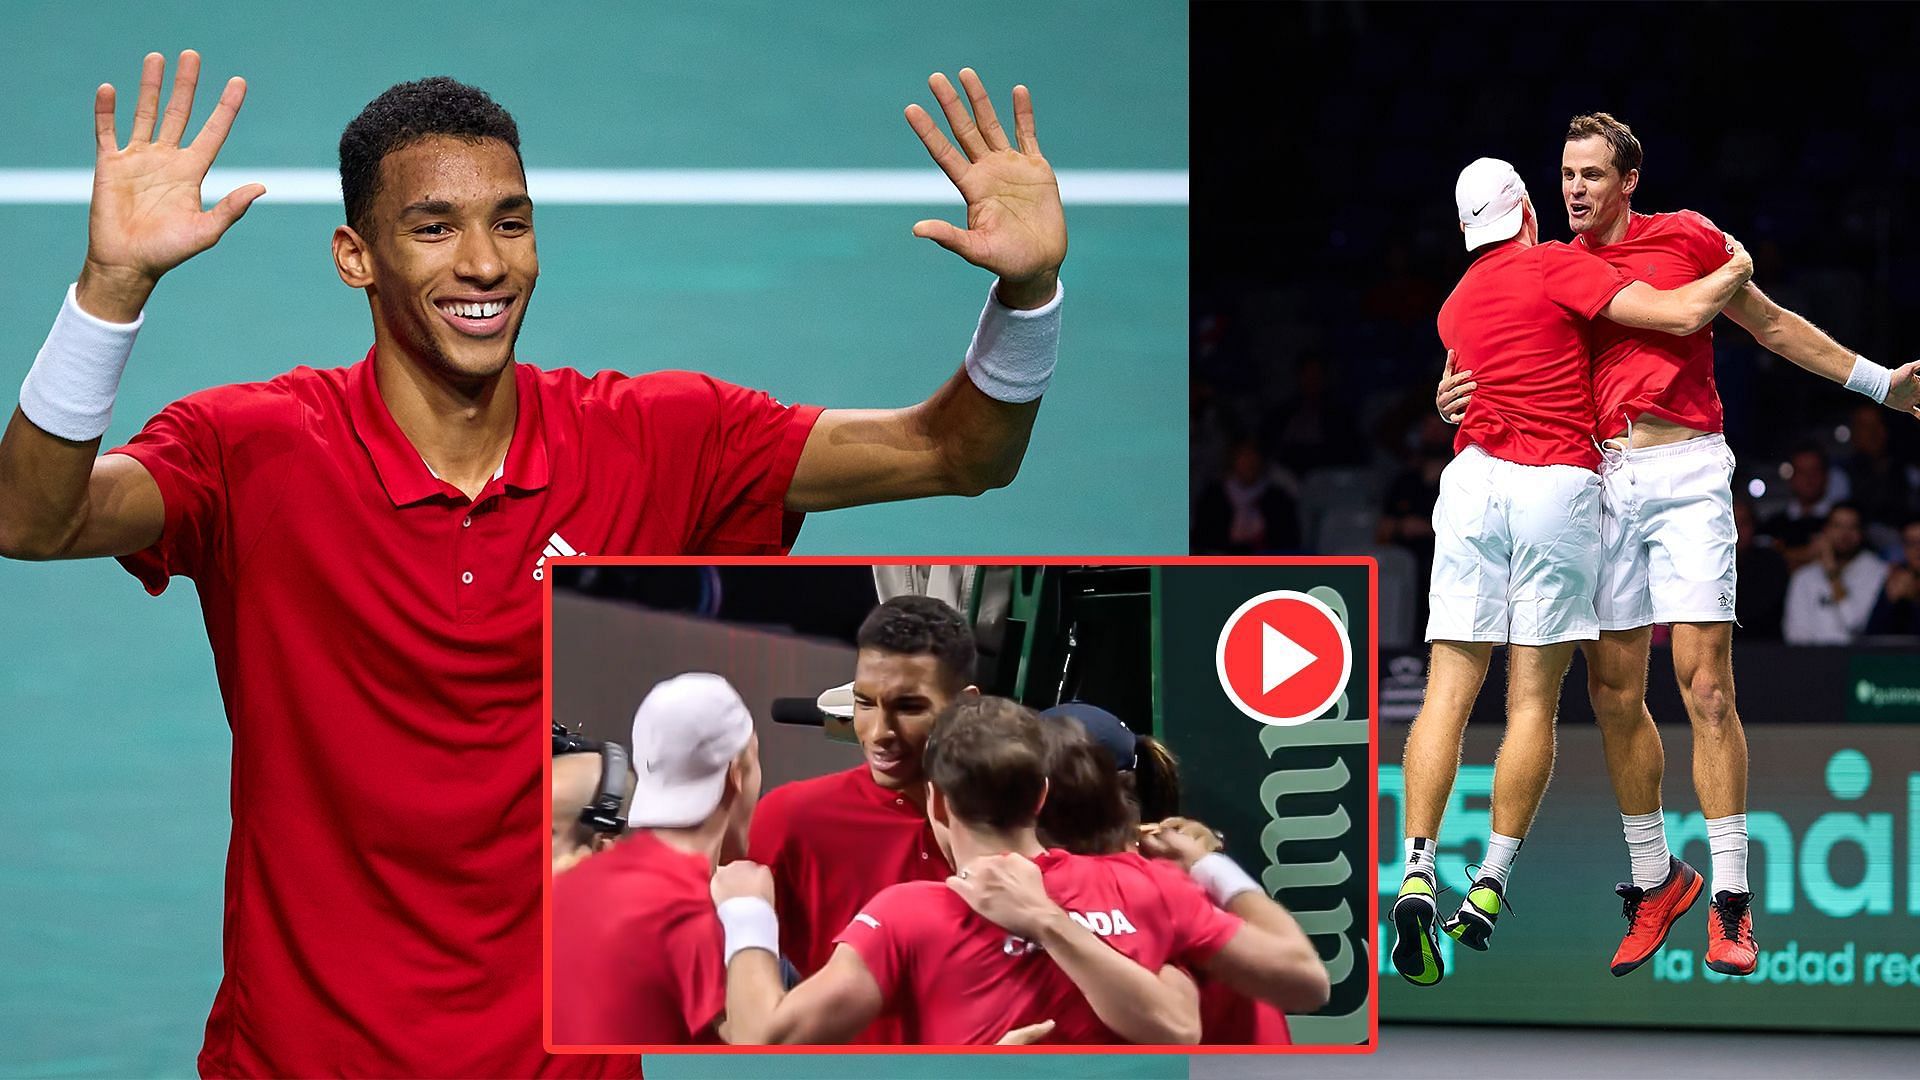 Team Canada celebrates their victory over Germany in the Davis Cup Finals